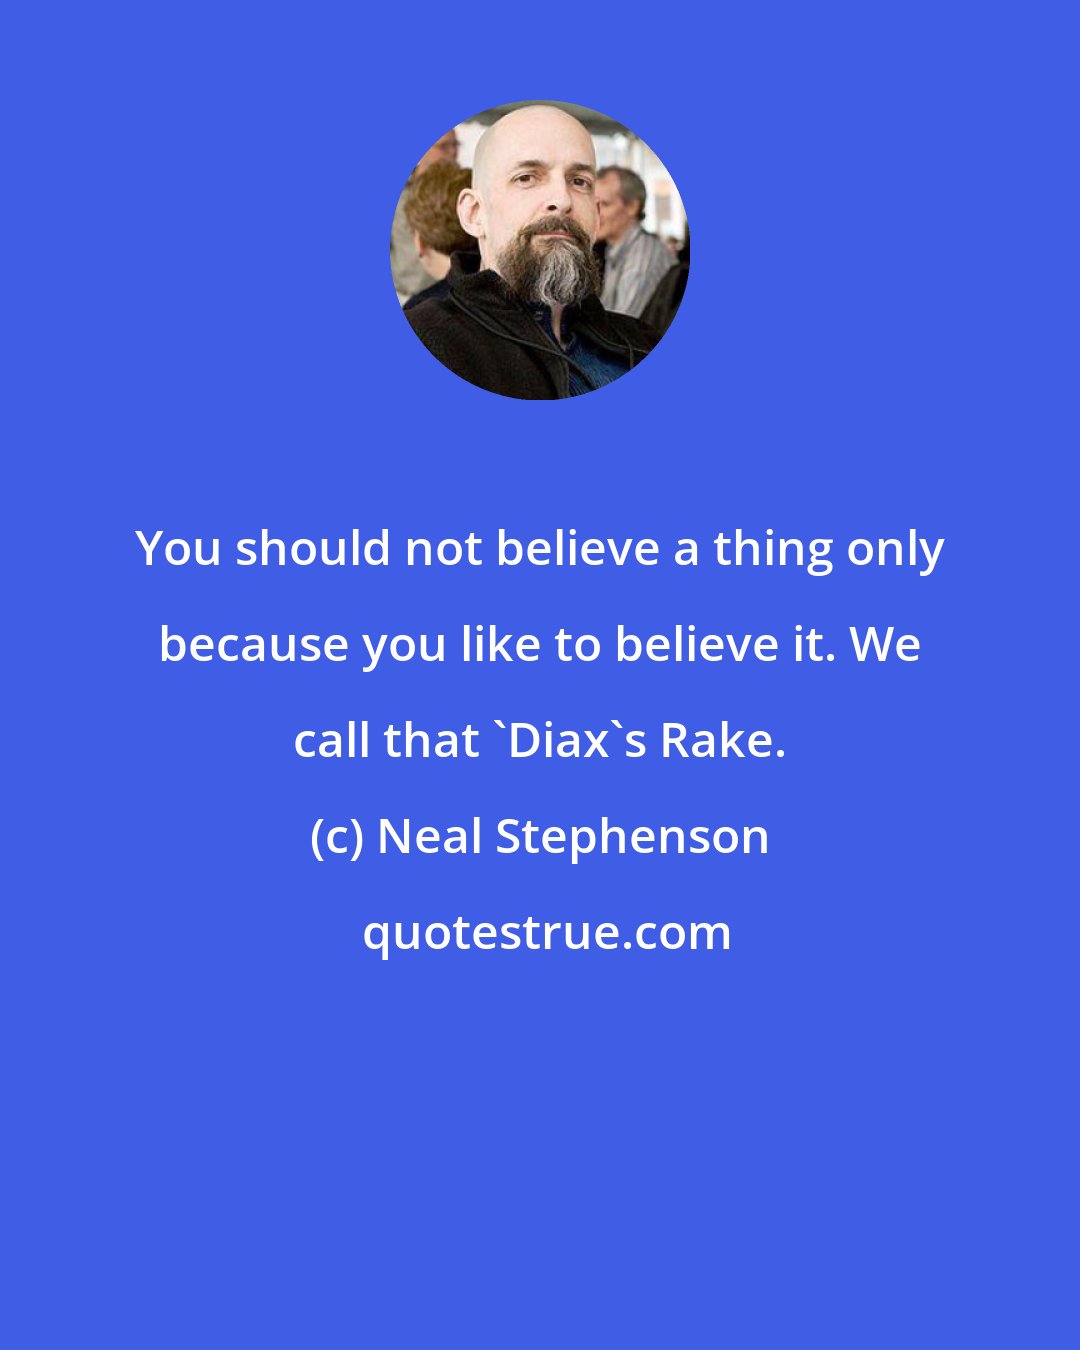 Neal Stephenson: You should not believe a thing only because you like to believe it. We call that 'Diax's Rake.